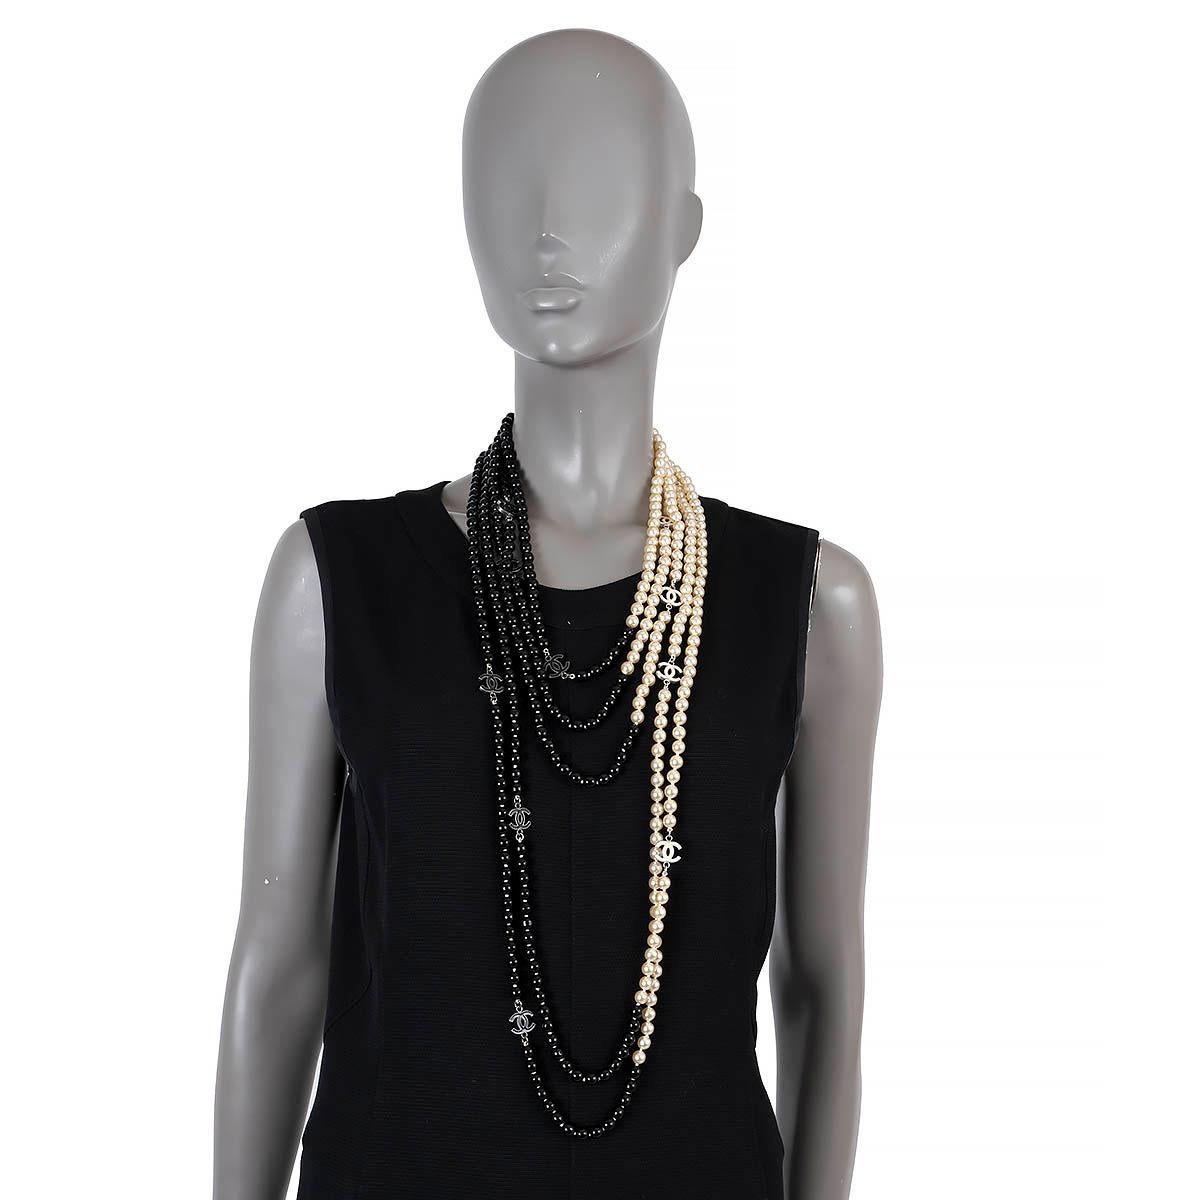 100% authentic Chanel multi strand faux pearl necklace in black and cream adorned with CC pendants. Adjustable chain closure. Has been worn and is in excellent condition. 

2005 Spring/Summer

Measurements
Model	05P
Length	60cm (23.4in)

All our